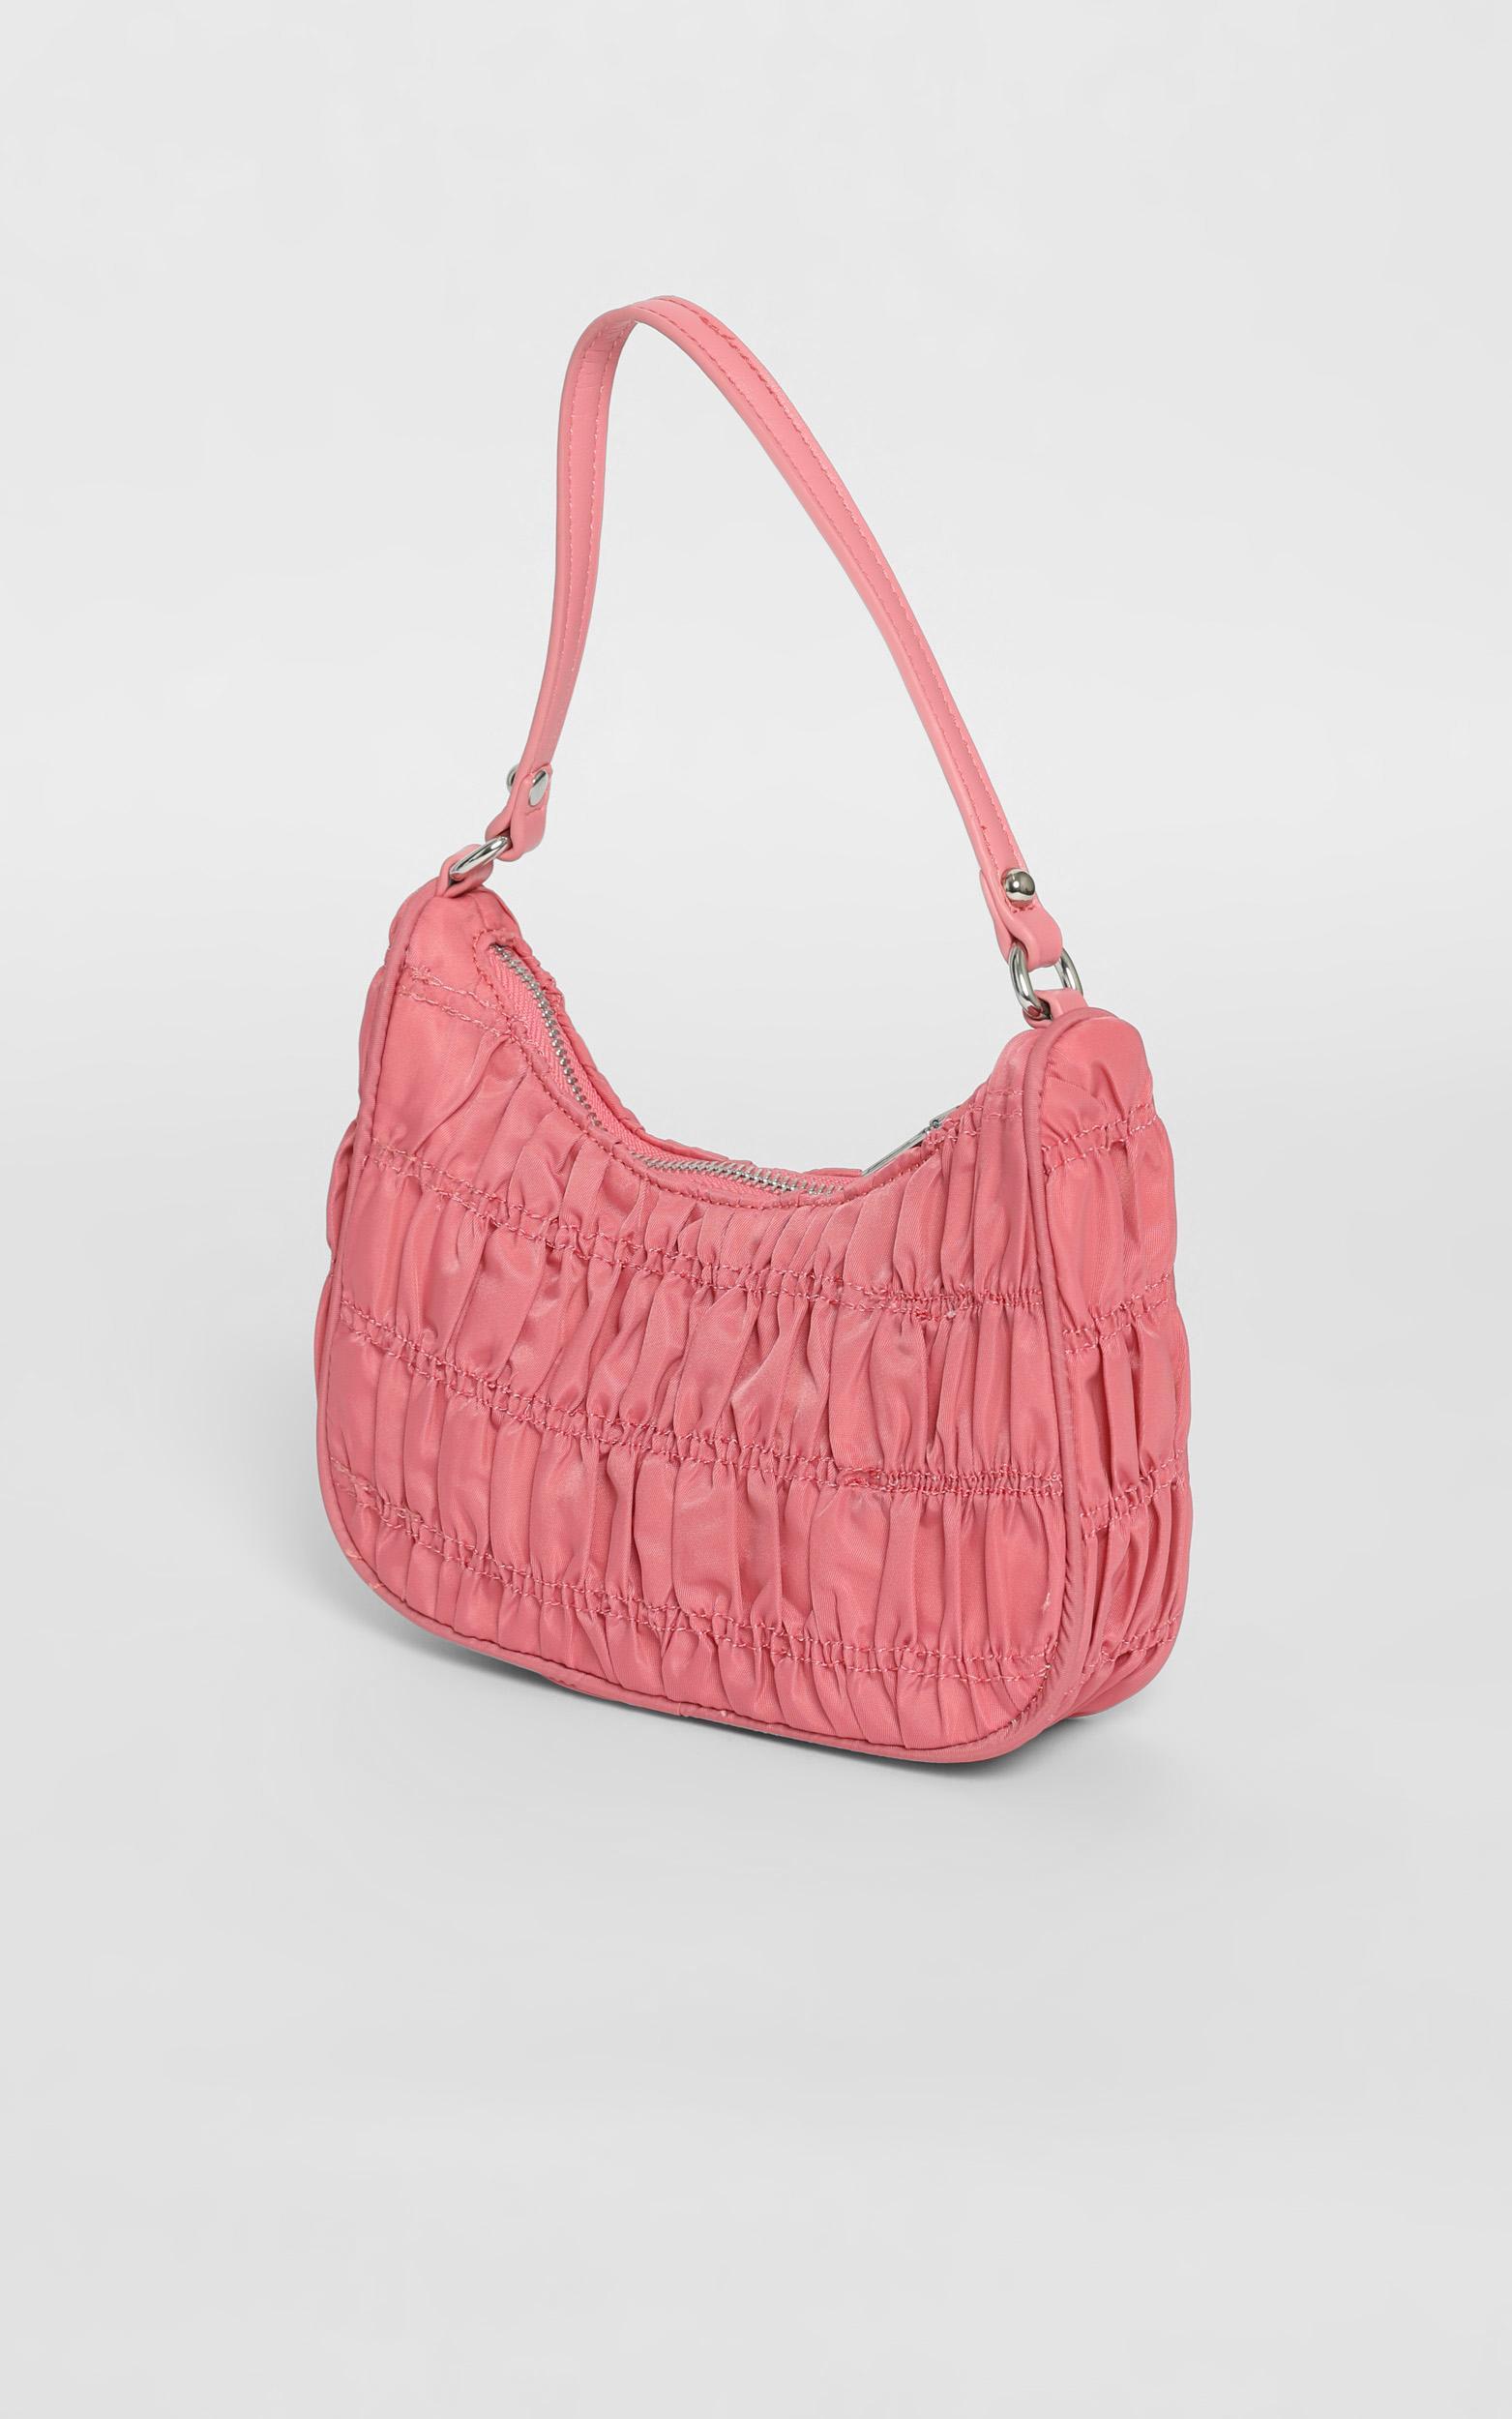 Georgia Mae - The Melrose Bag in Dusty Pink Nylon, , hi-res image number null